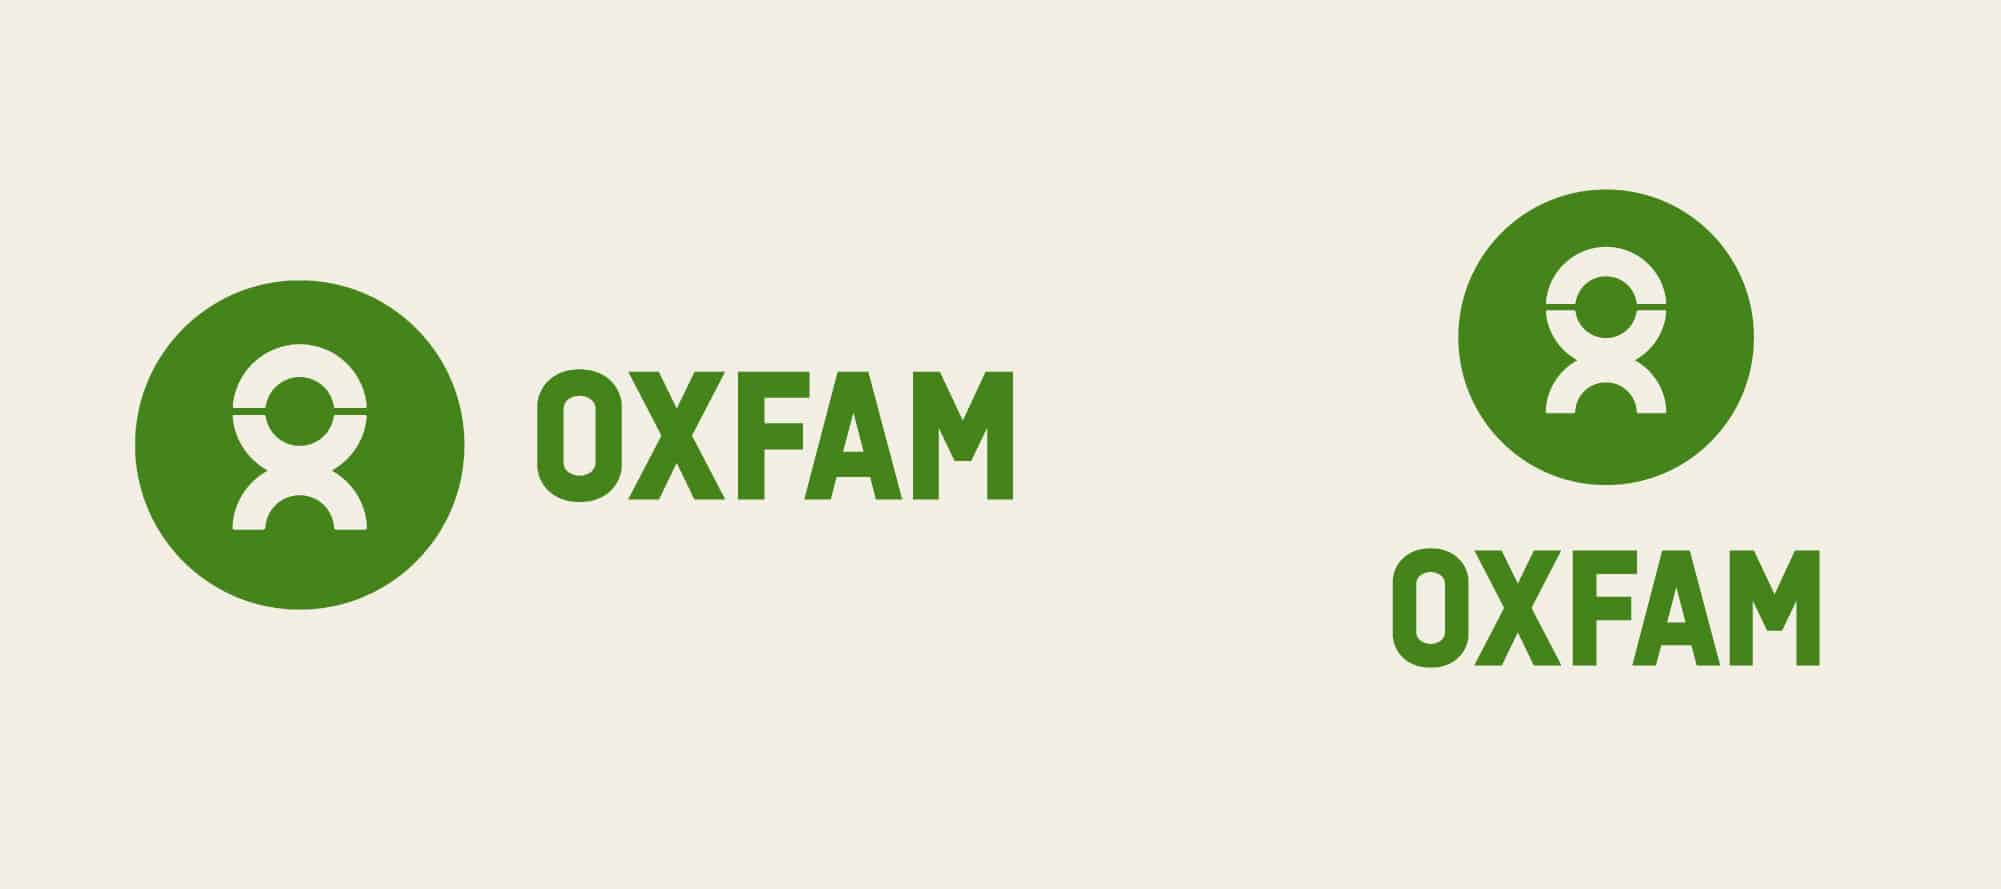 Two versions of Oxfam’s nonprofit logo side by side: horizontal green and vertical green.